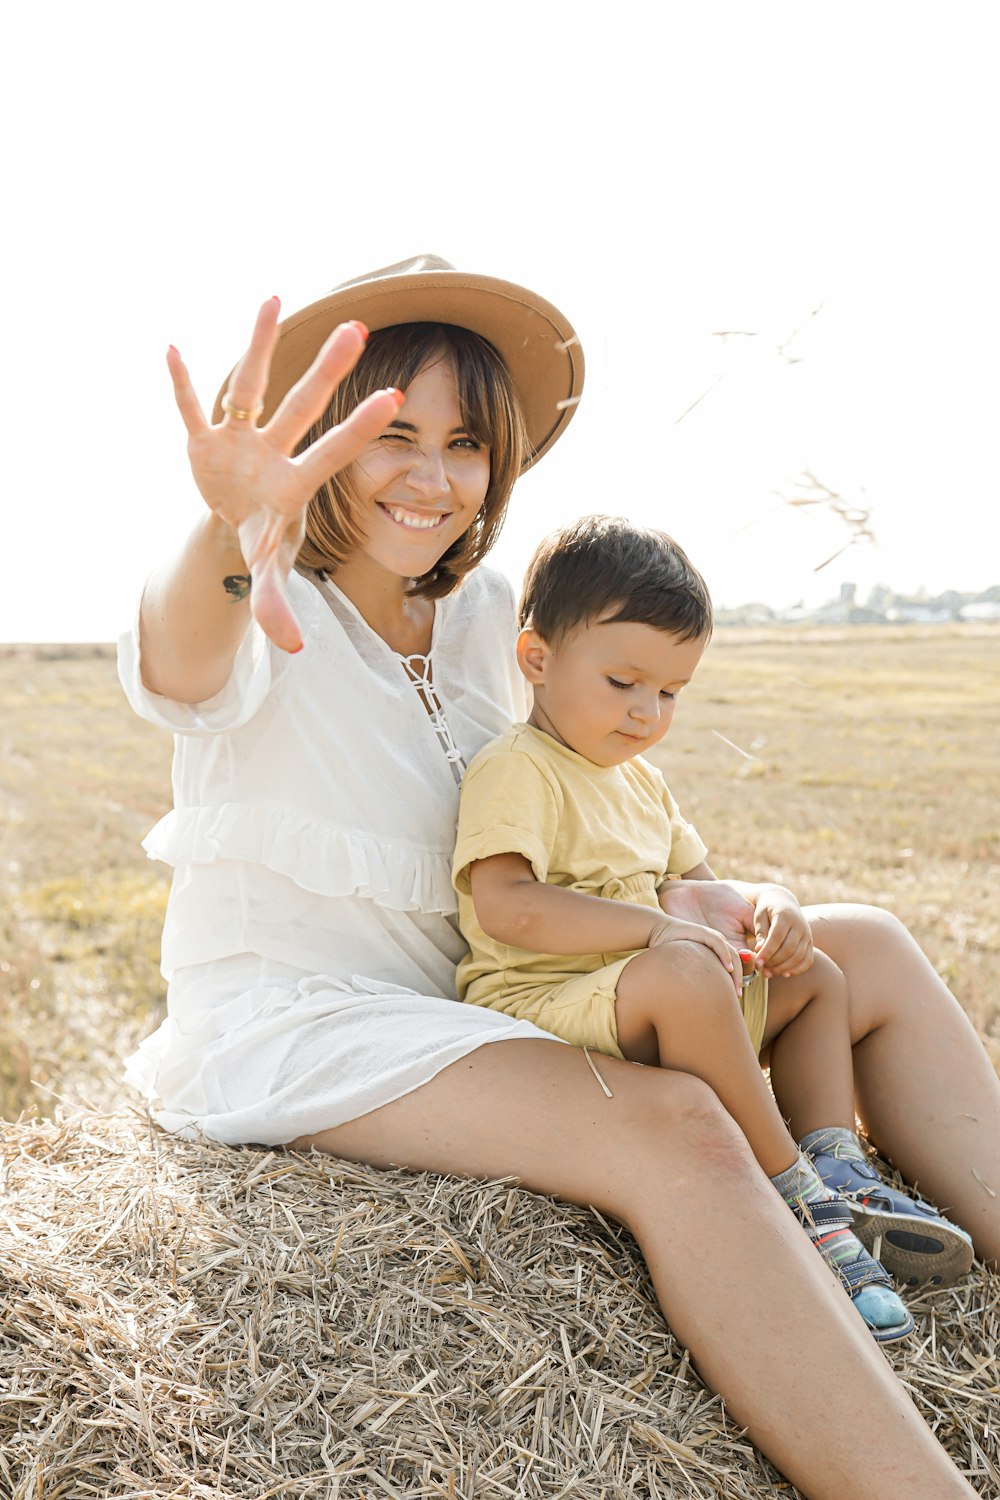 woman and boy sitting on hay bale